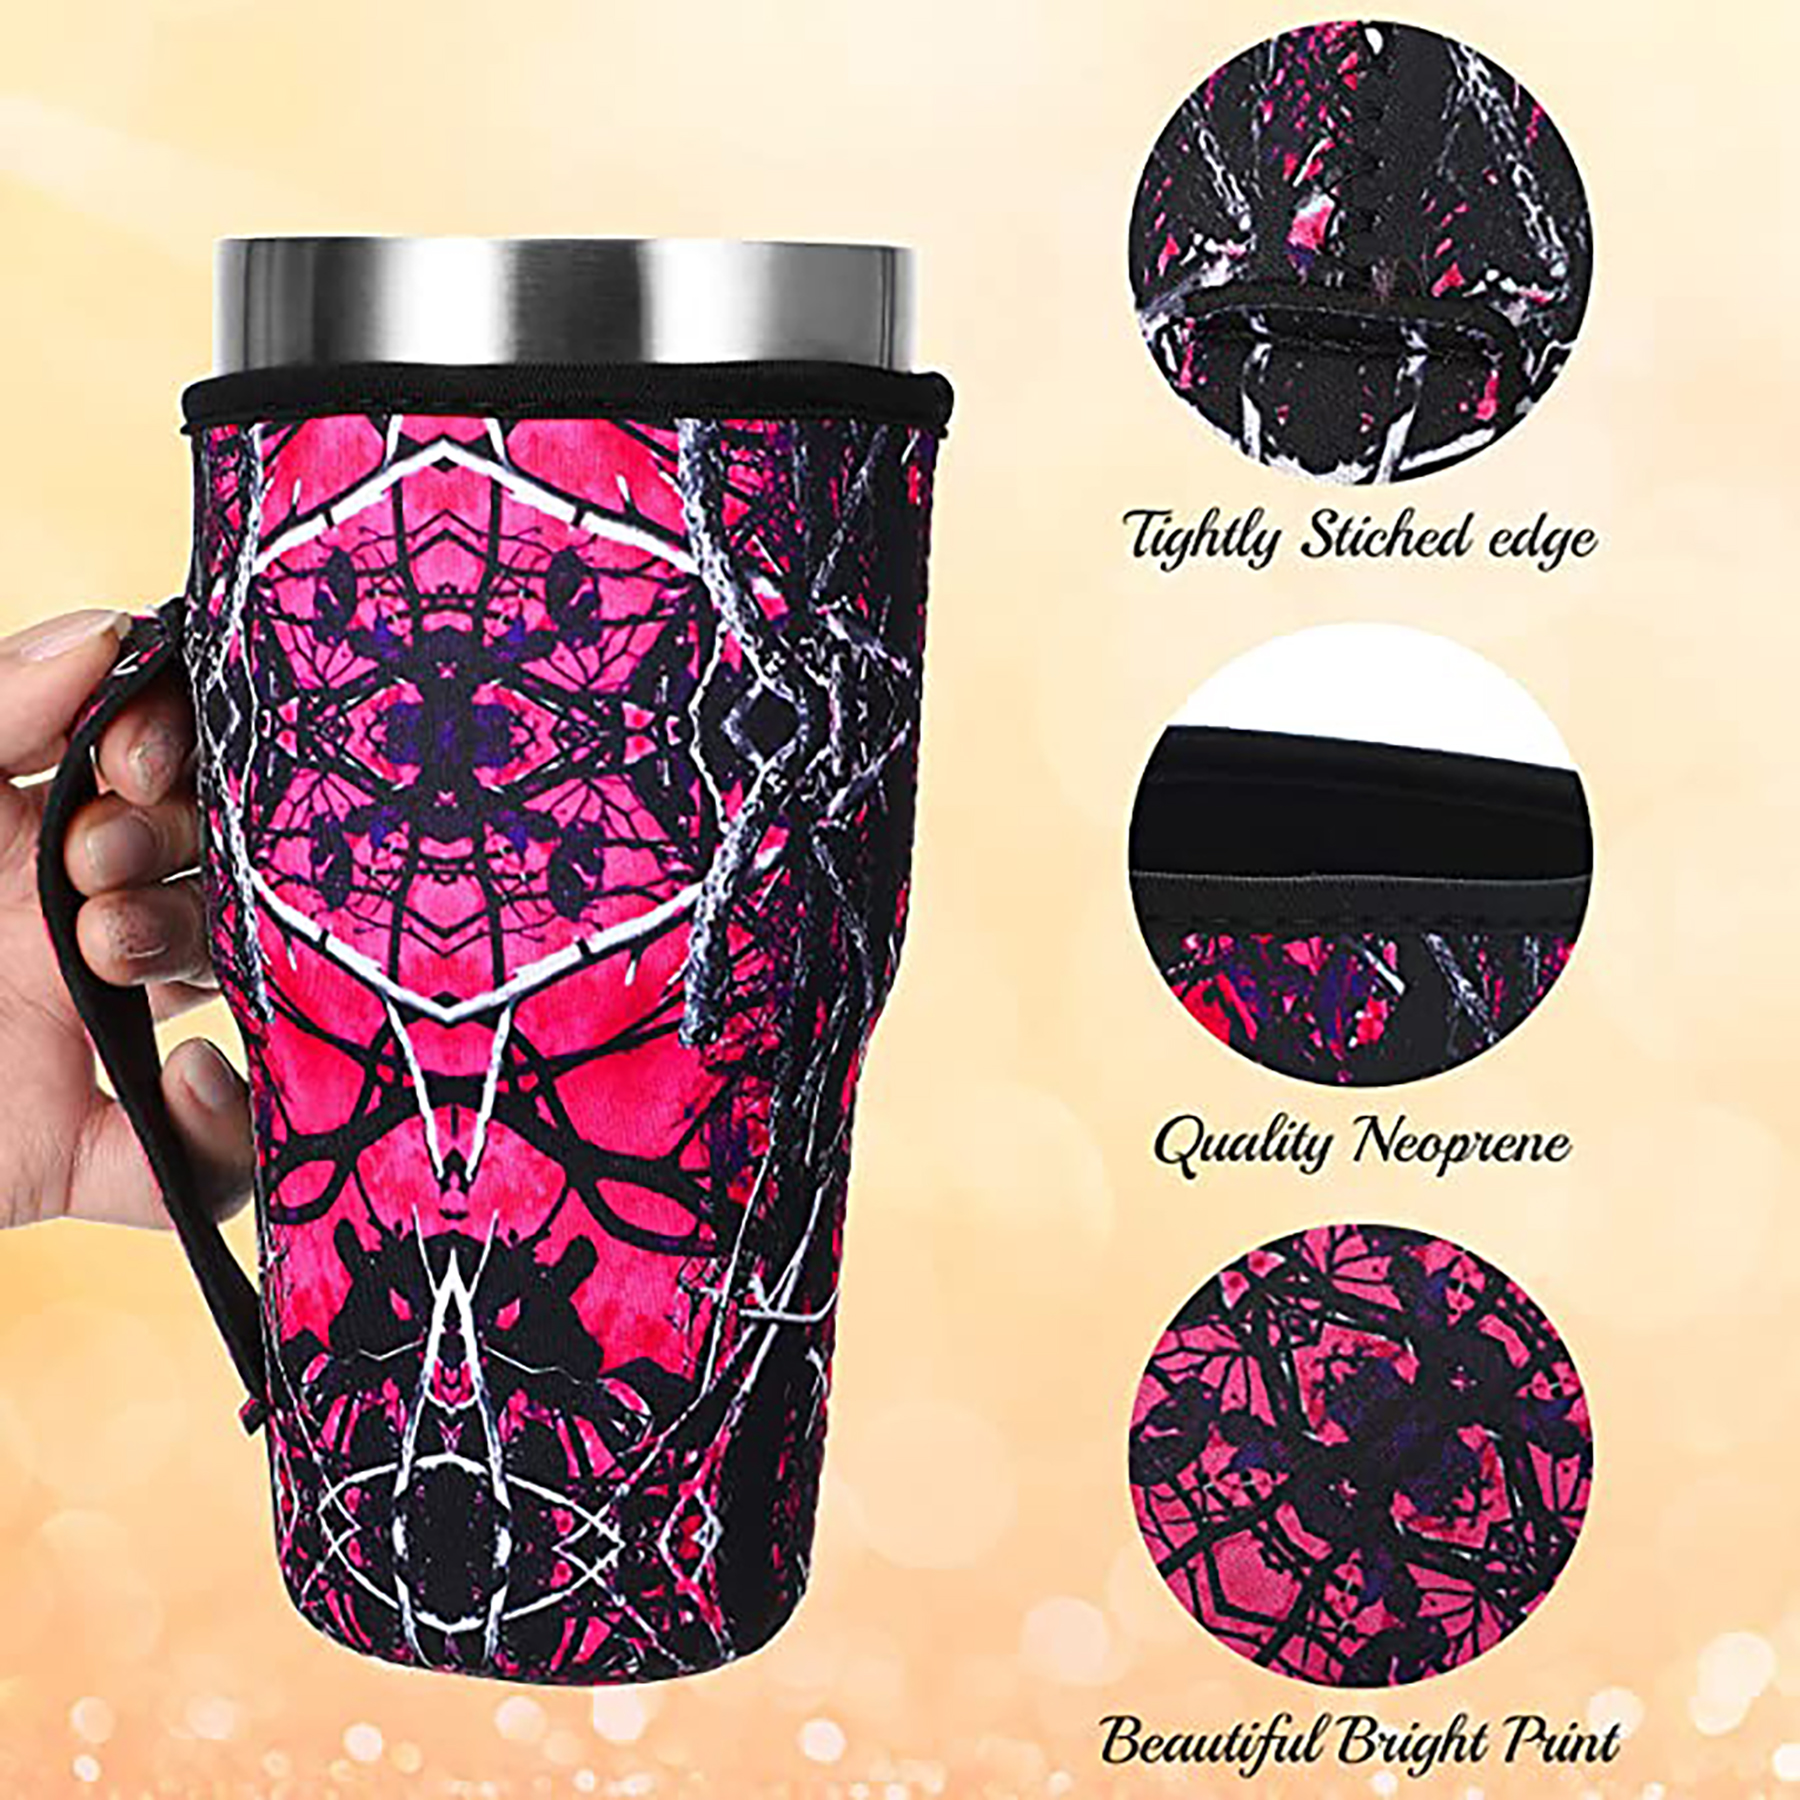 30-32 oz Reusable Neoprene Insulated Sleeves Cup Cover